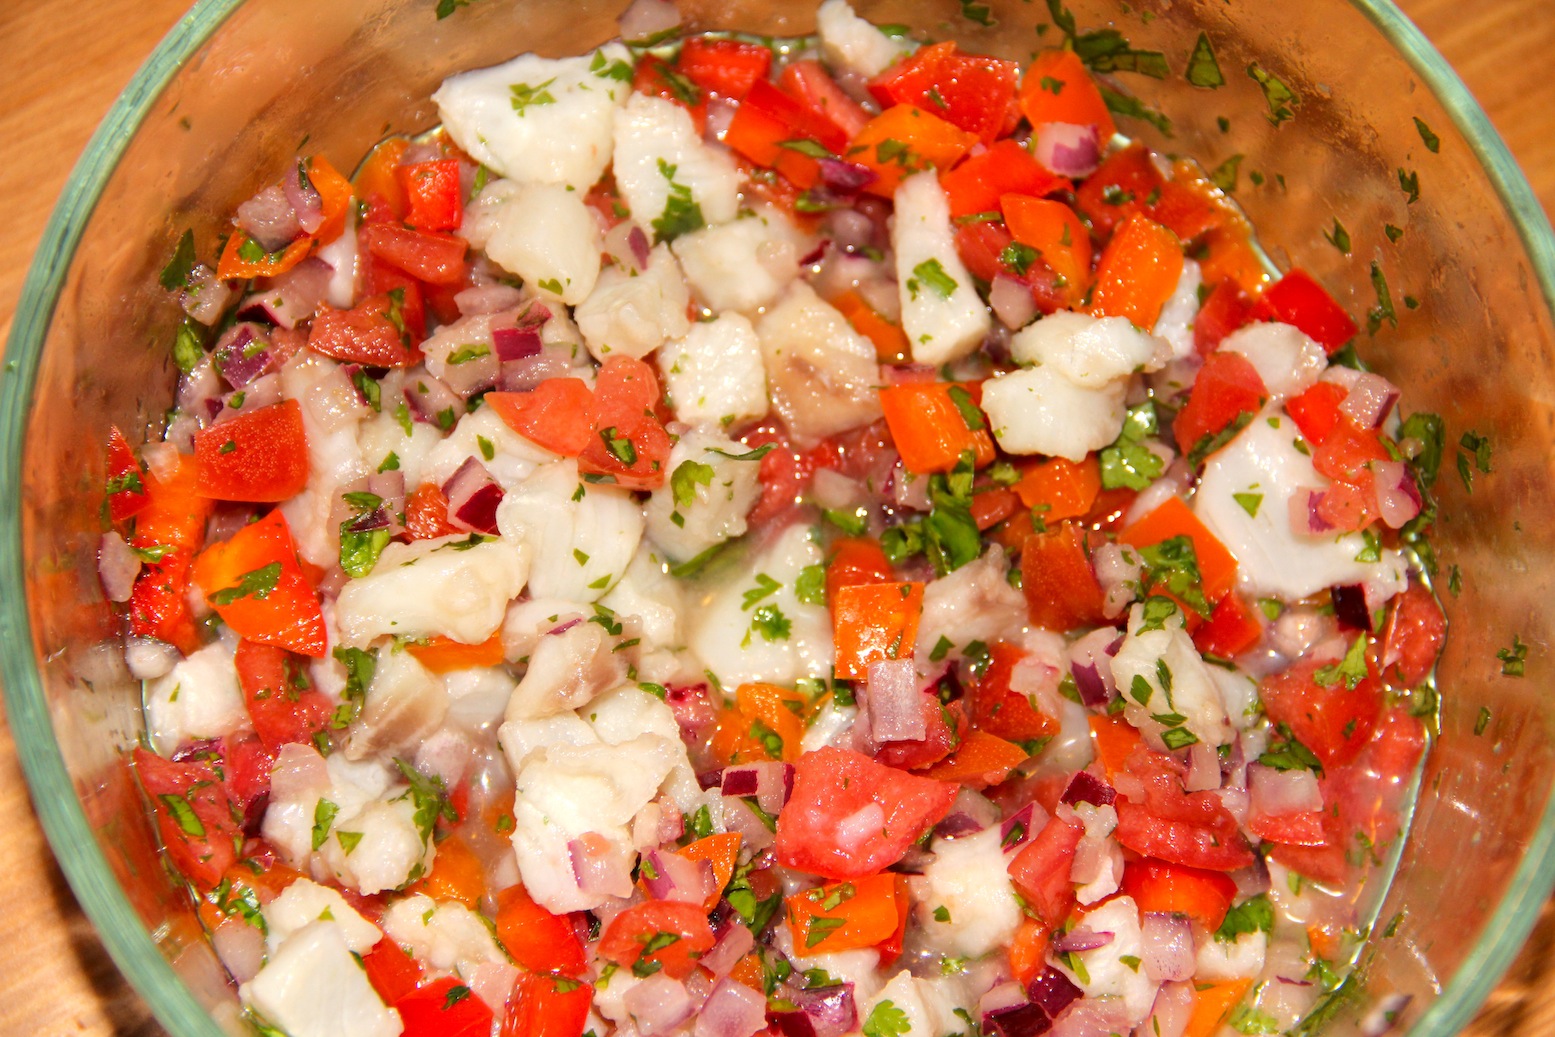 Ceviche Recipe - Needles and Know How